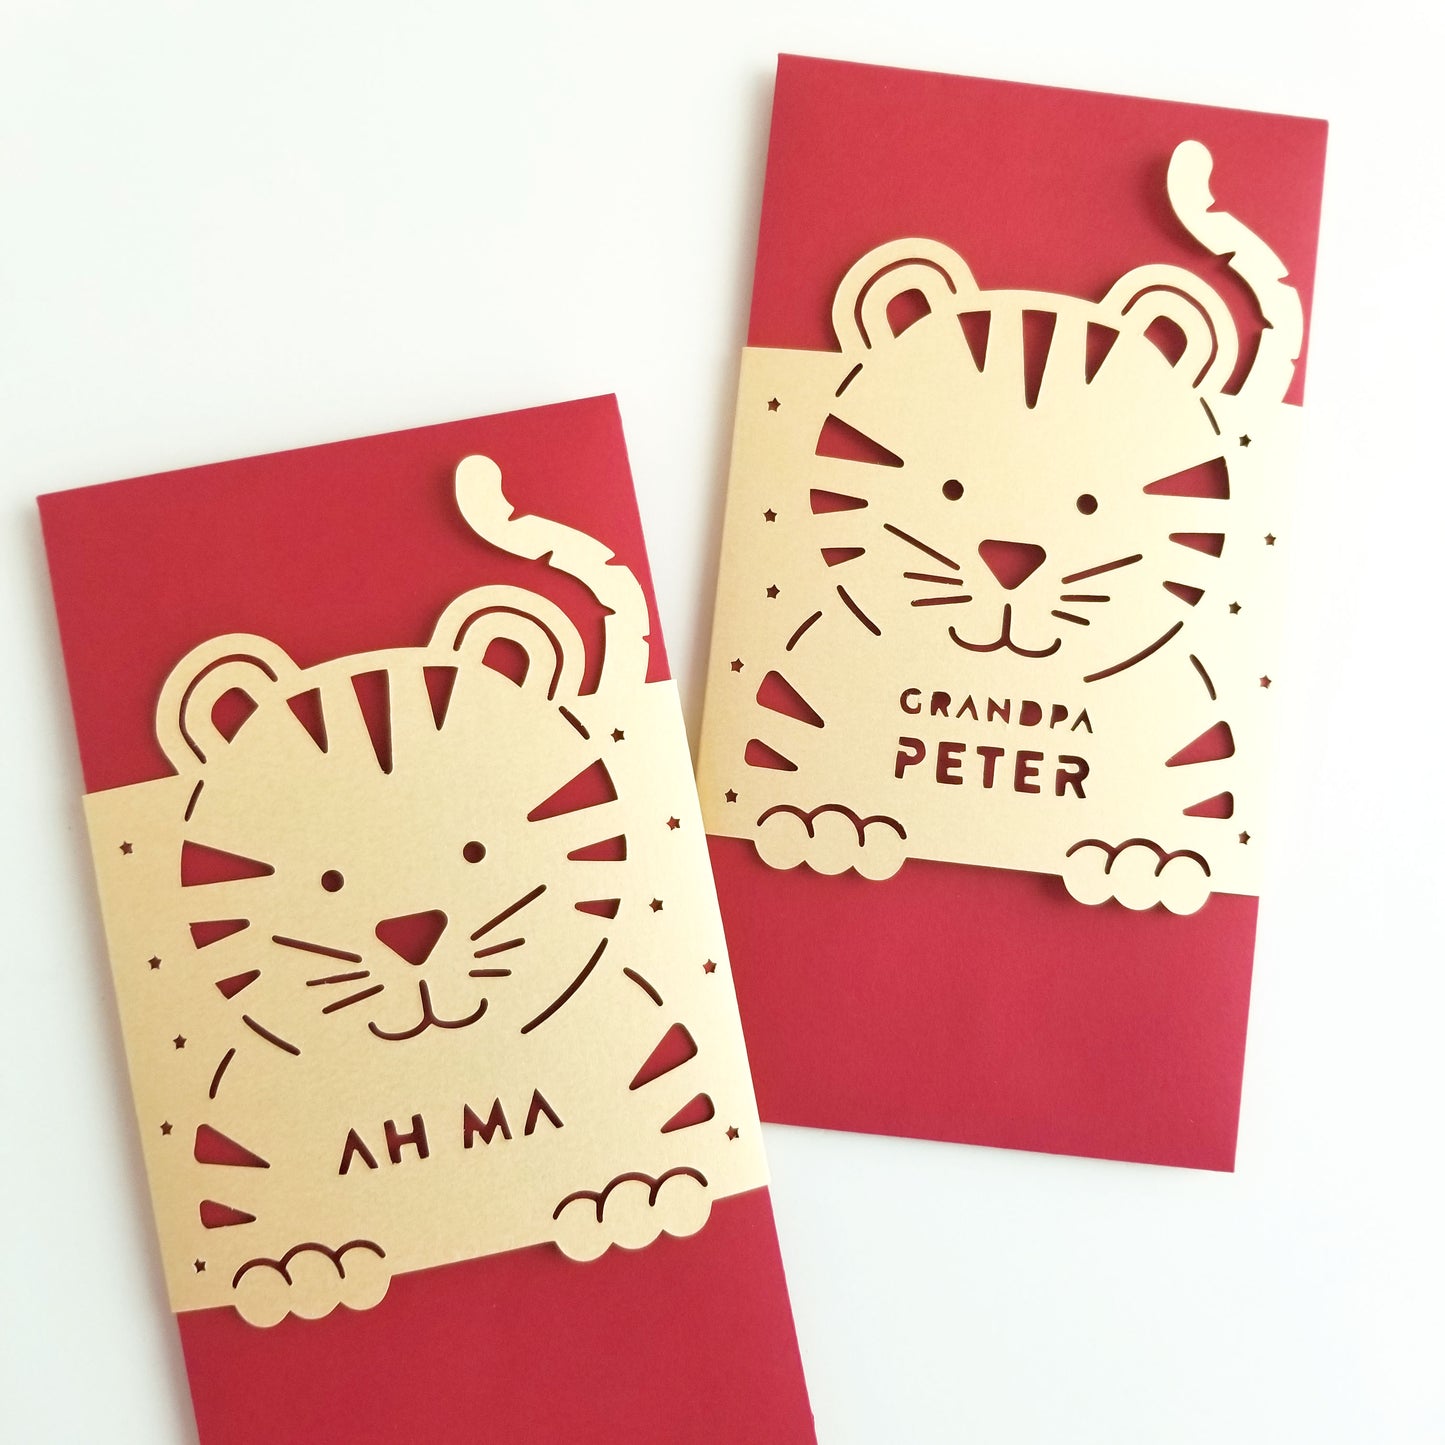 2022 Year of the Tiger Red Envelope, personalized